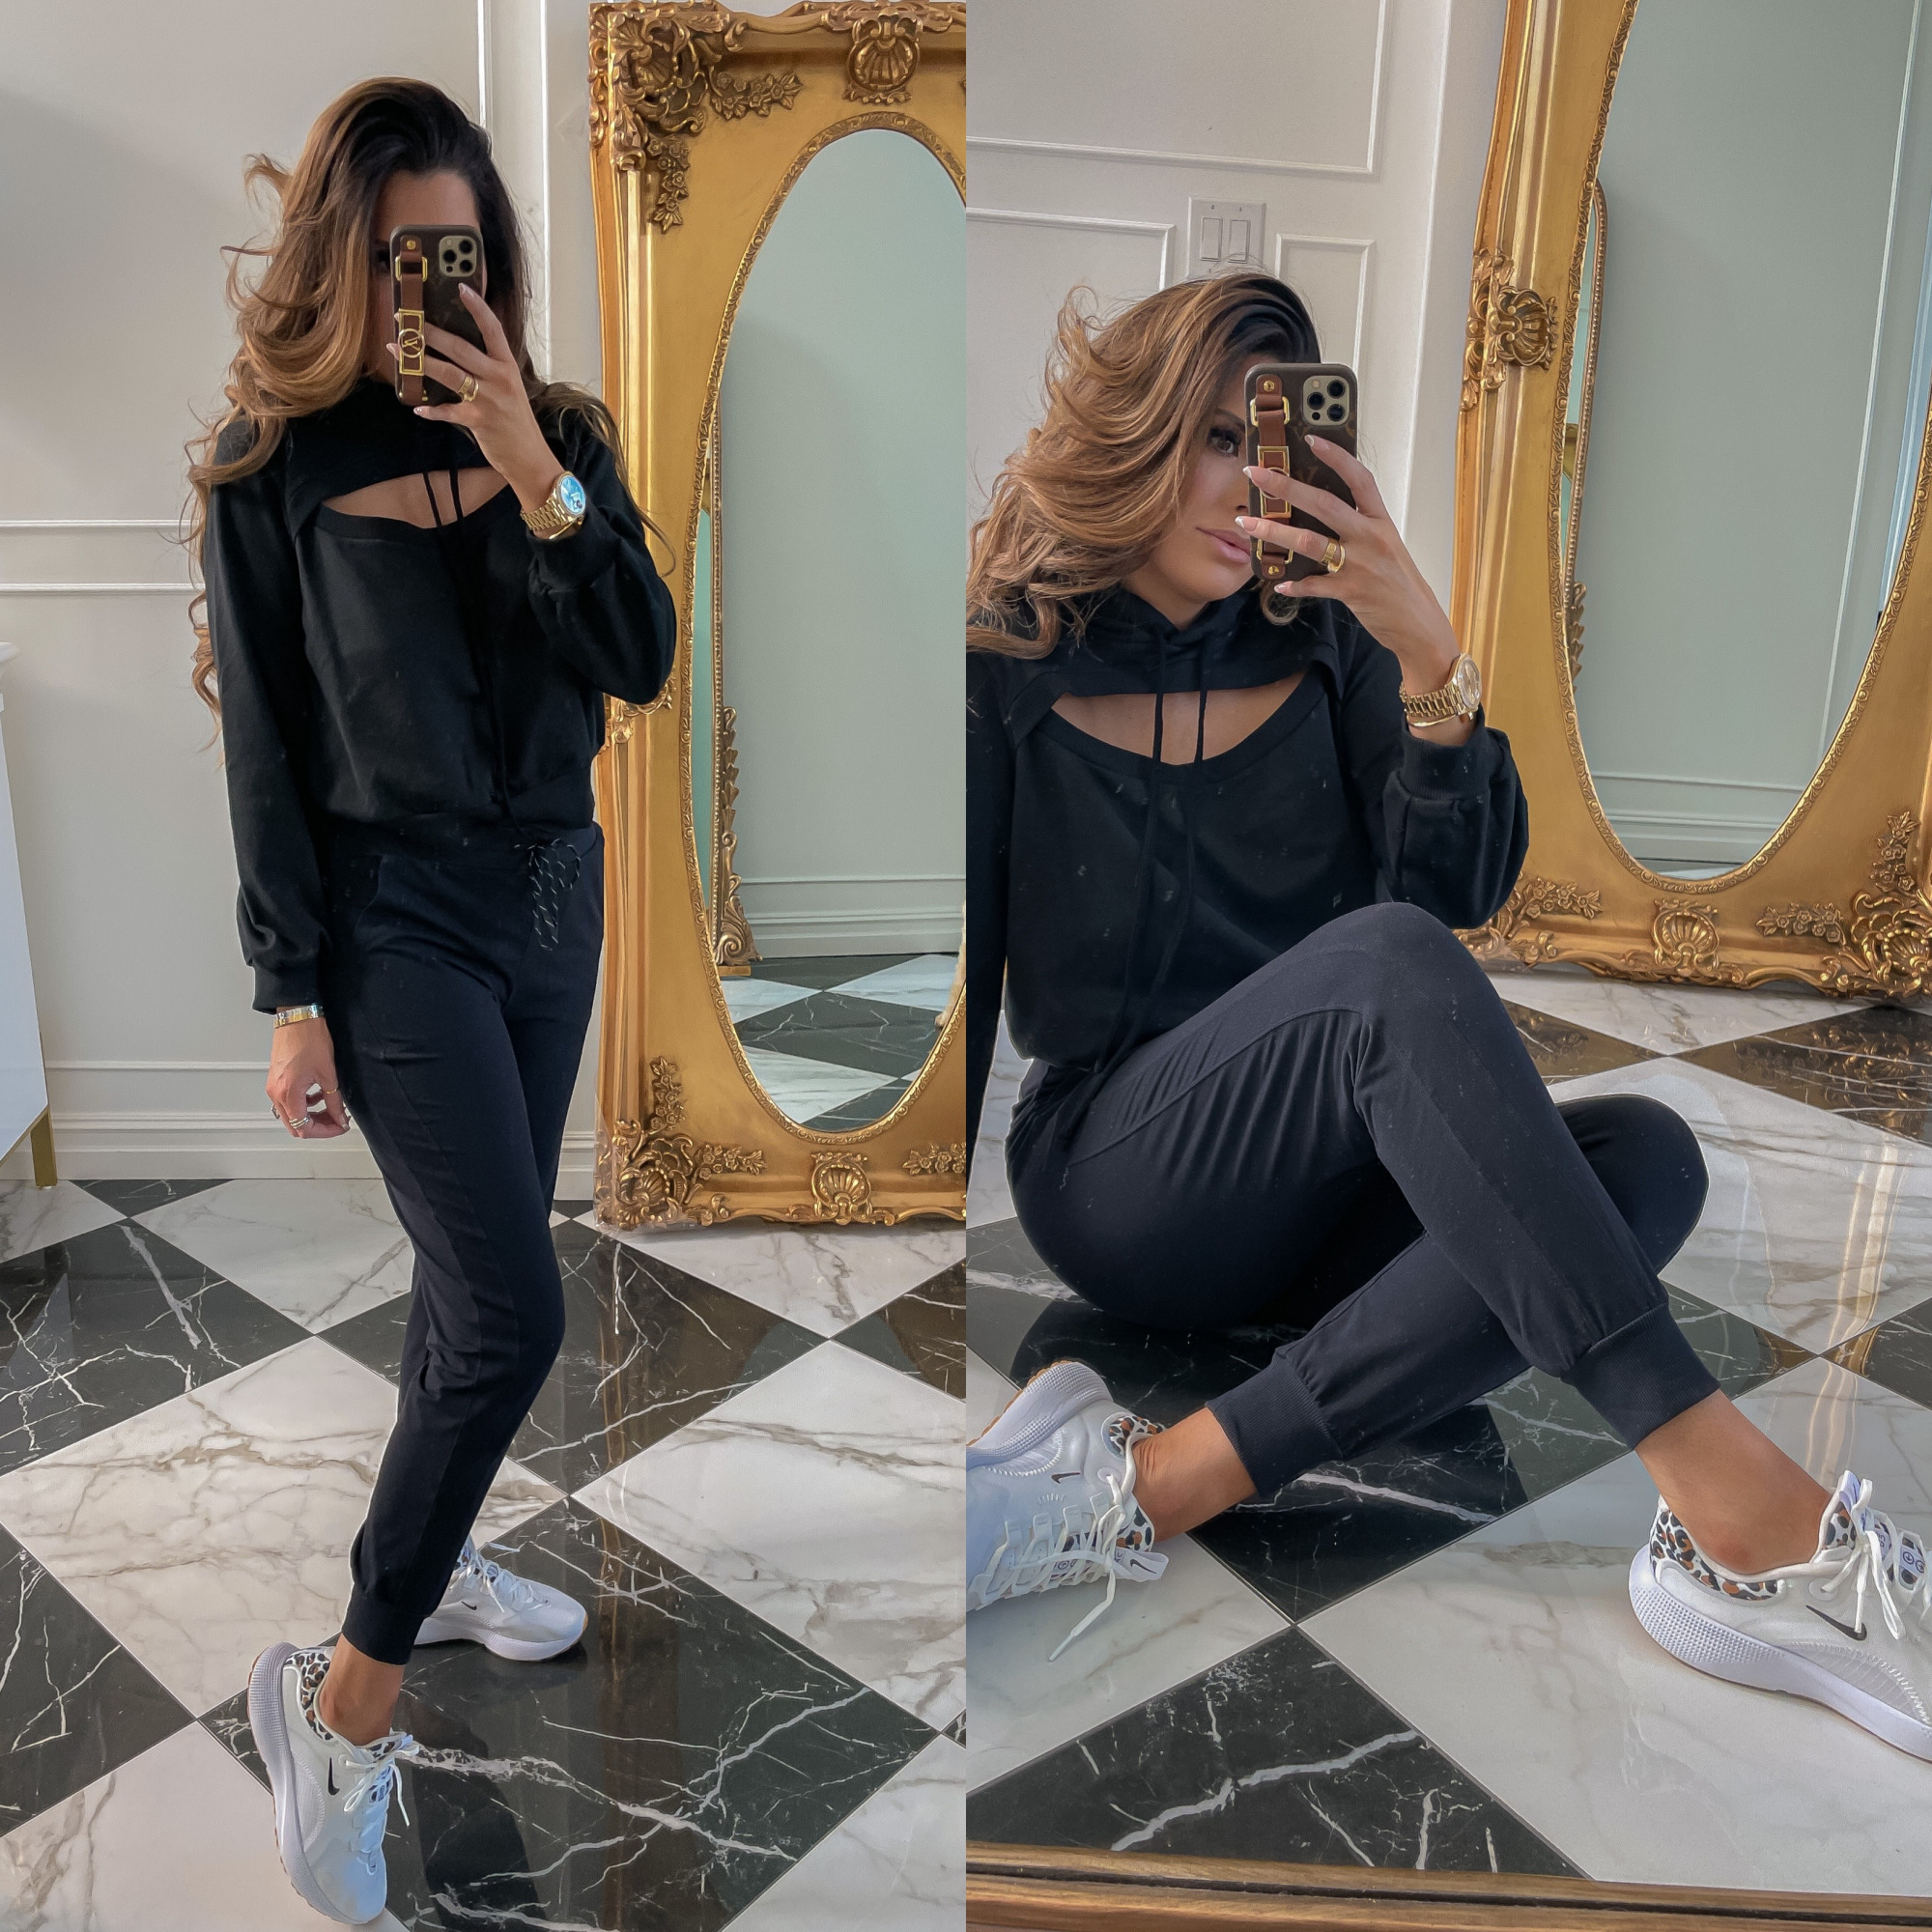 dstrom Anniversary Sale 2021 Picks, best of NSALE 2021, Nordstrom sale must haves blog post, Emily gemma3 | Nordstrom Anniversary Sale US fashion blog, The Sweetest Thing: image of Emily Gemma wearing a Nordstrom peekaboo hoodie, black drawstring joggers and nike sneakers. 